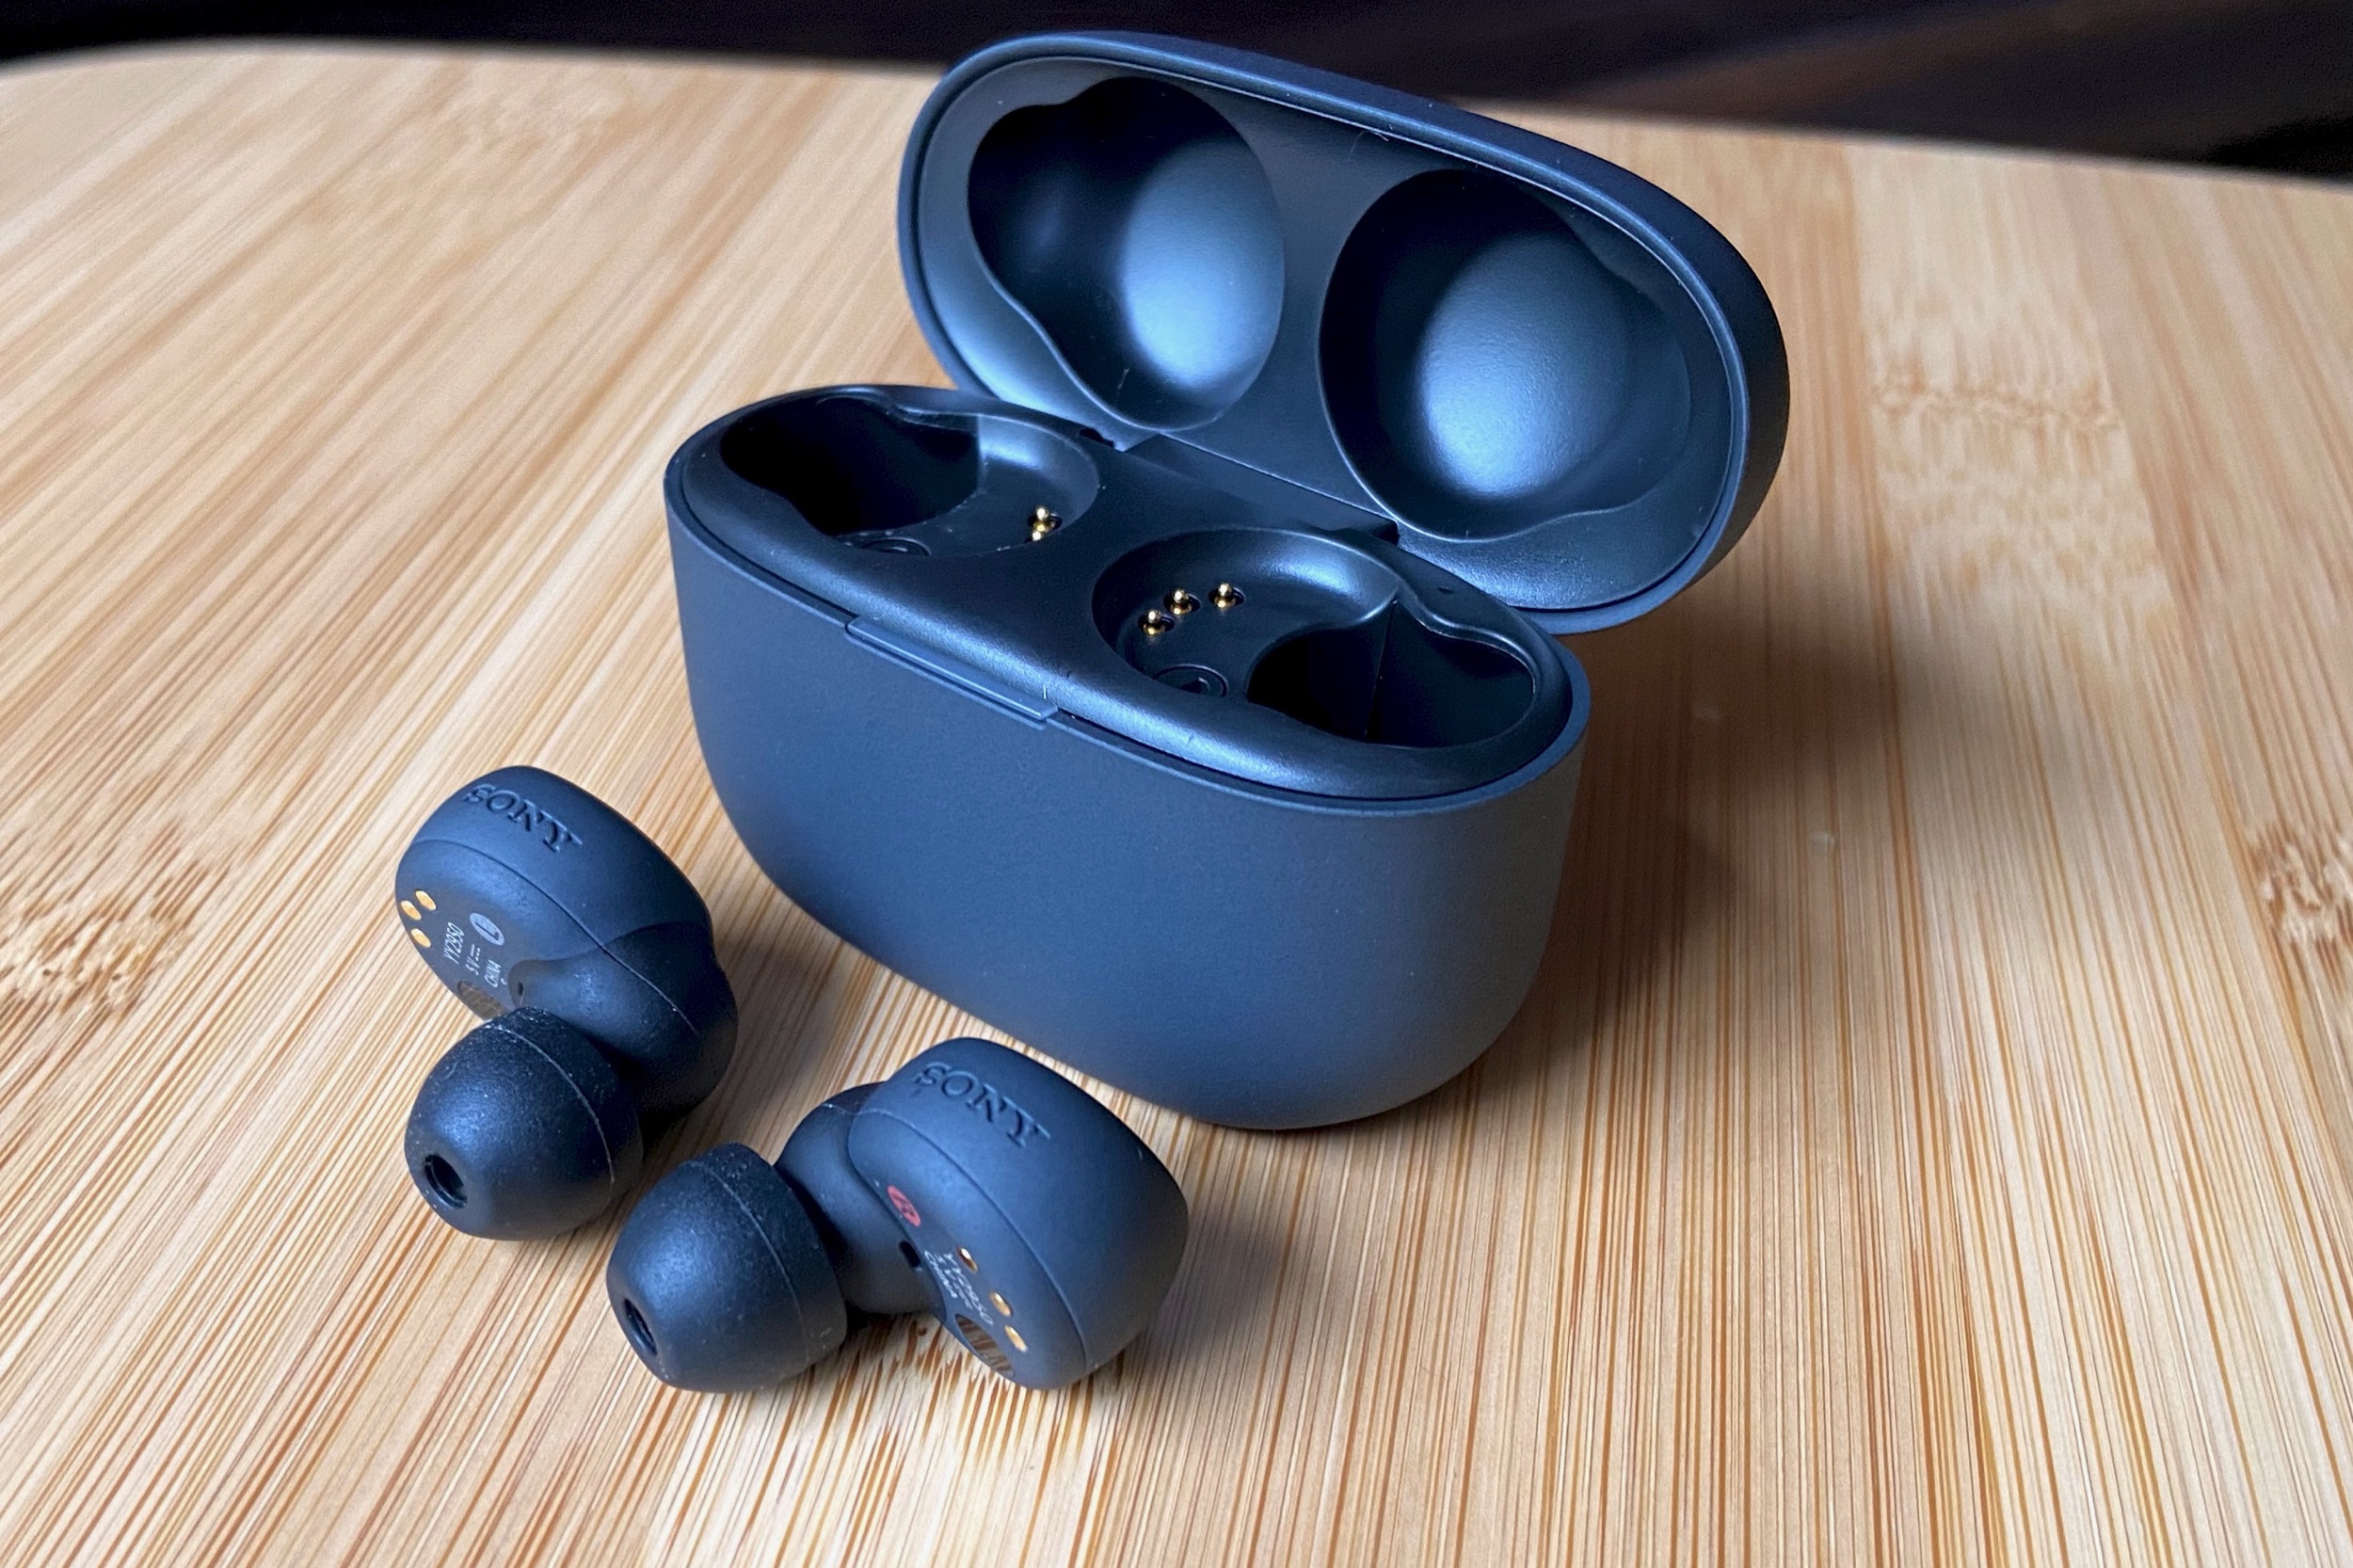 Sony LinkBuds review: These open-back earbuds fall well short of awesome